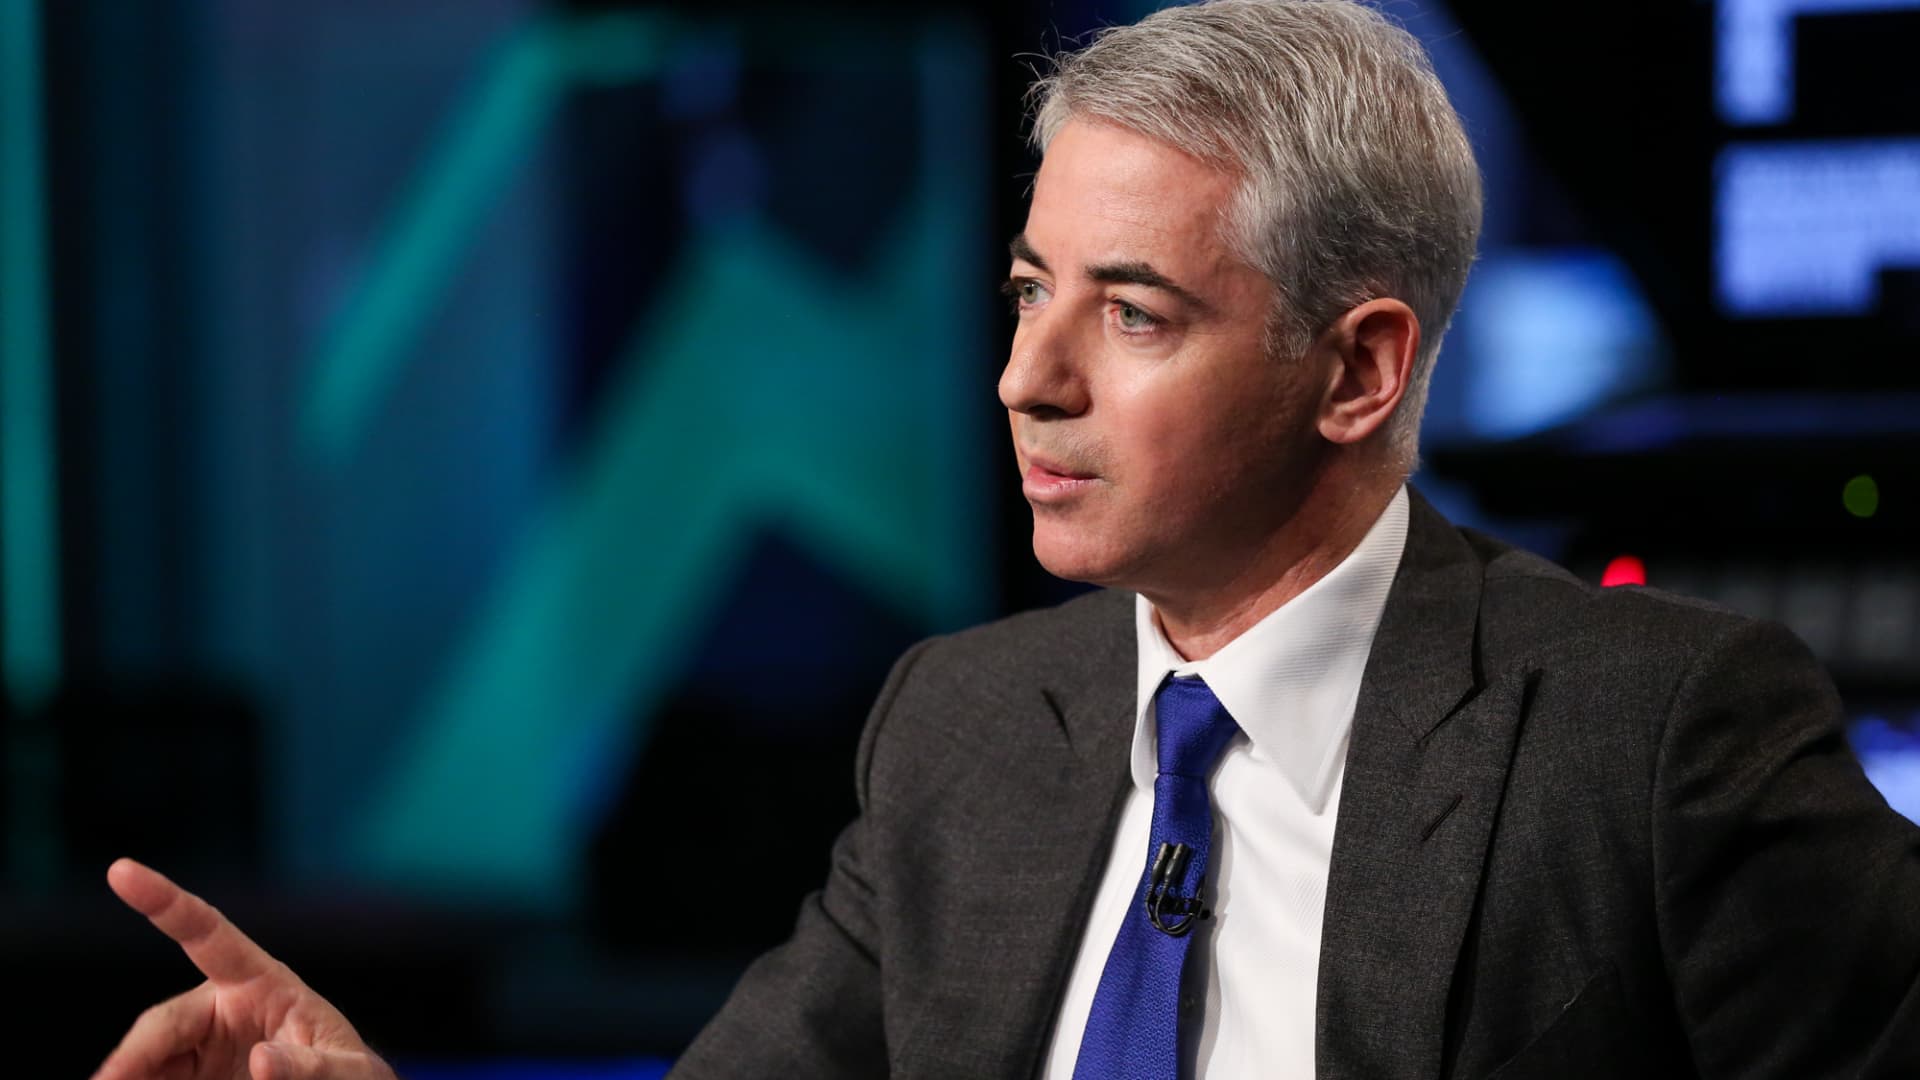 Bill Ackman doubts the Fed can tame inflation, says higher prices ahead